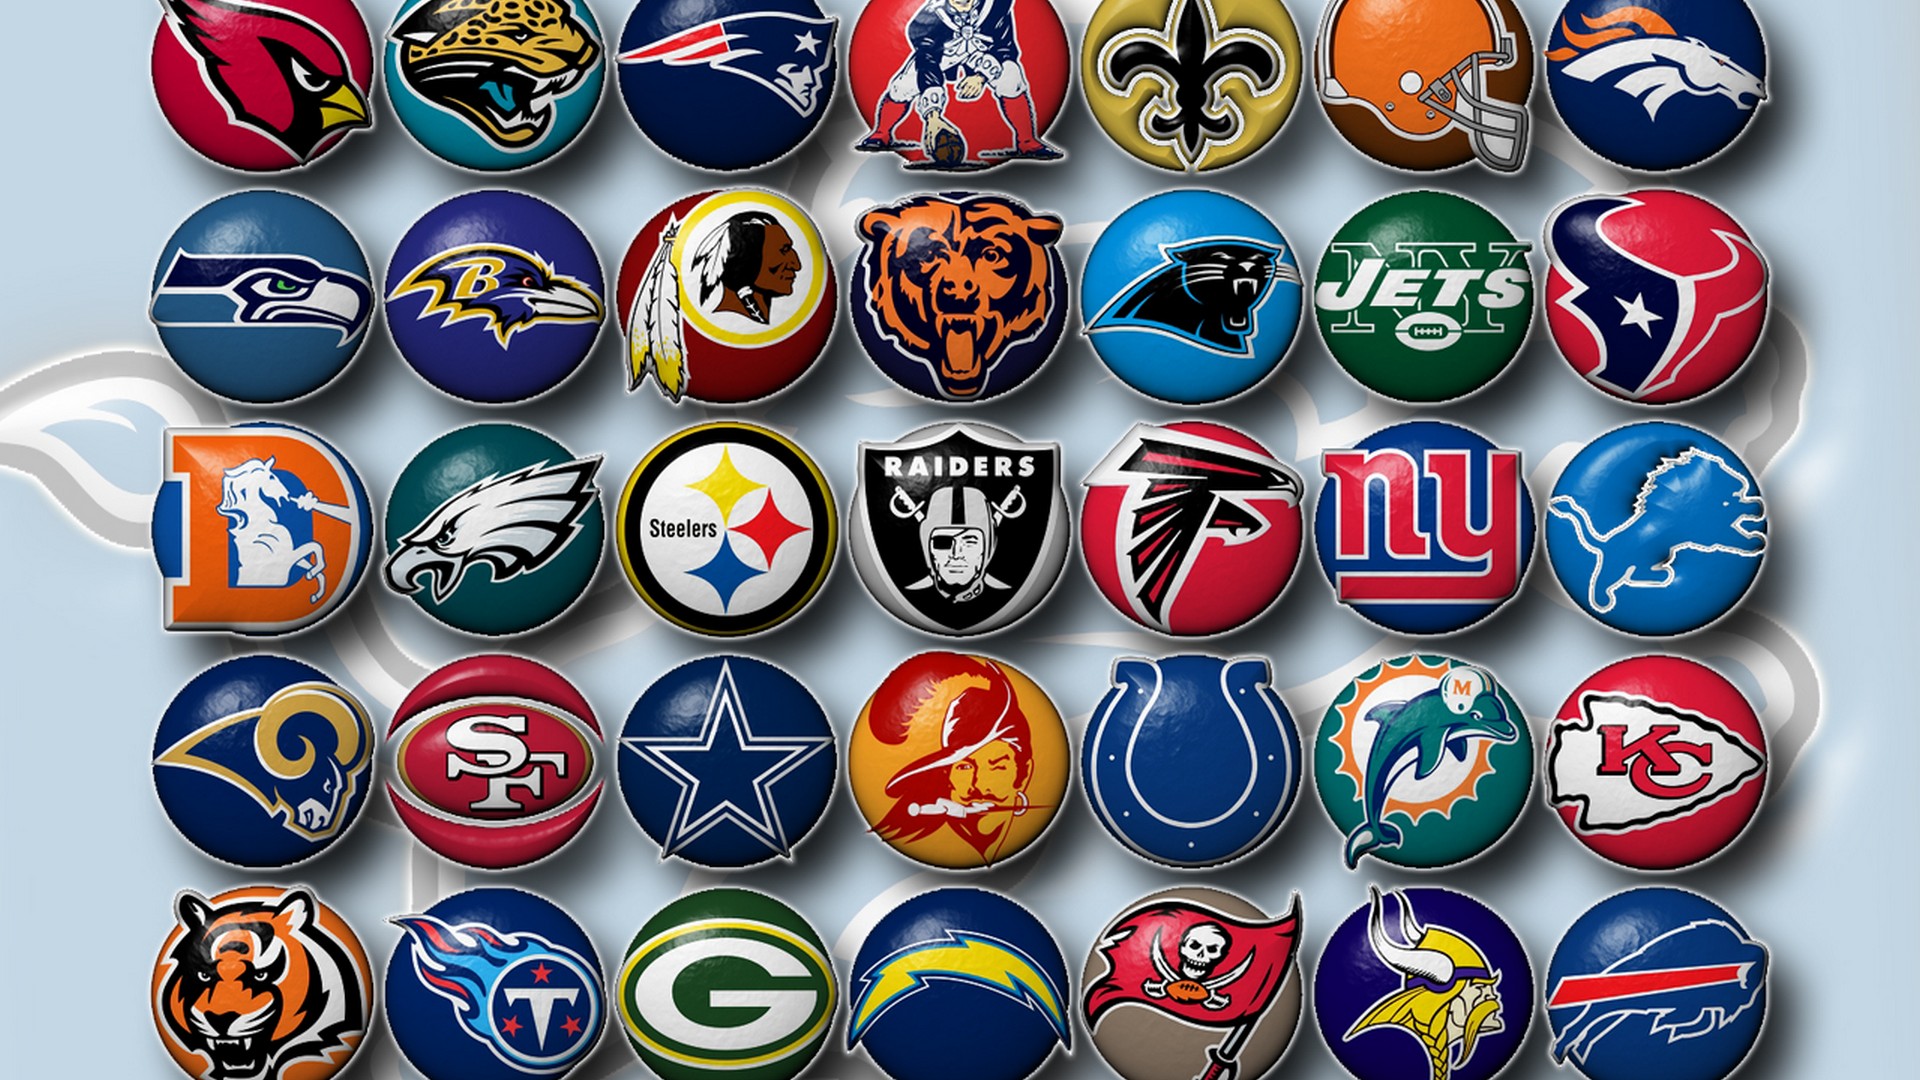 NFL For PC Wallpaper 1920x1080